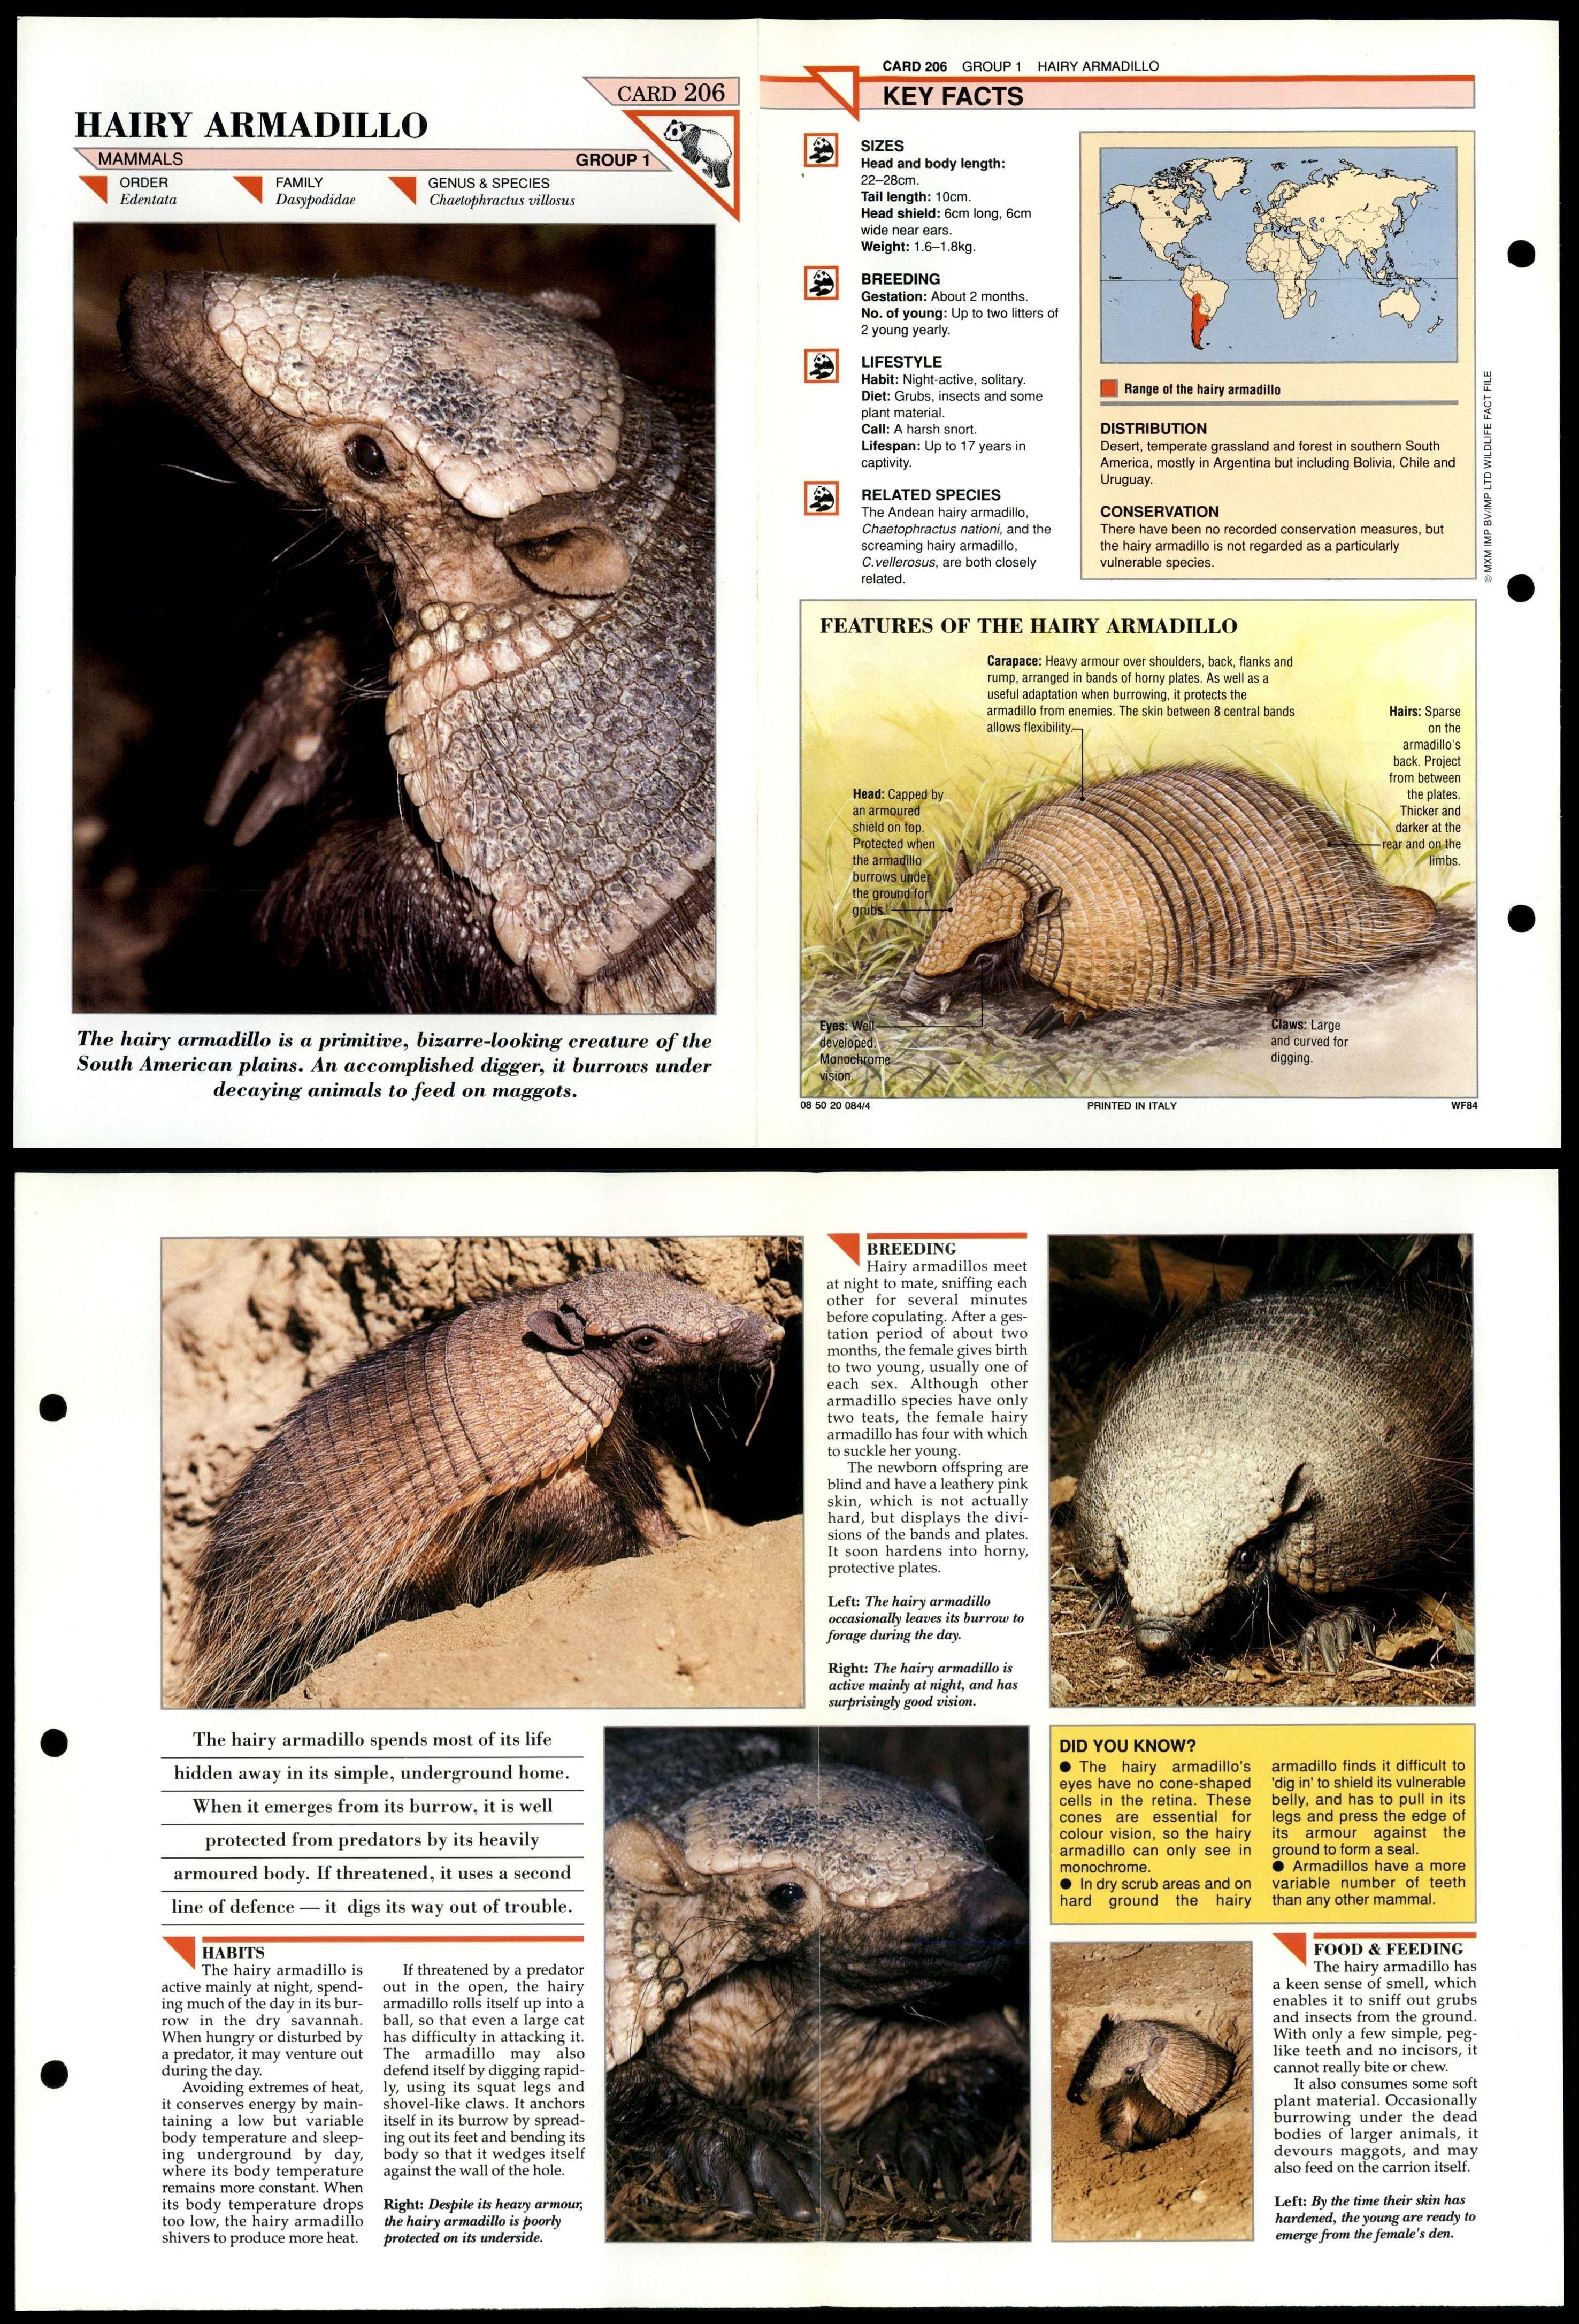 Hairy Armadillo #206 Mammals Wildlife Fact File Fold-Out Card